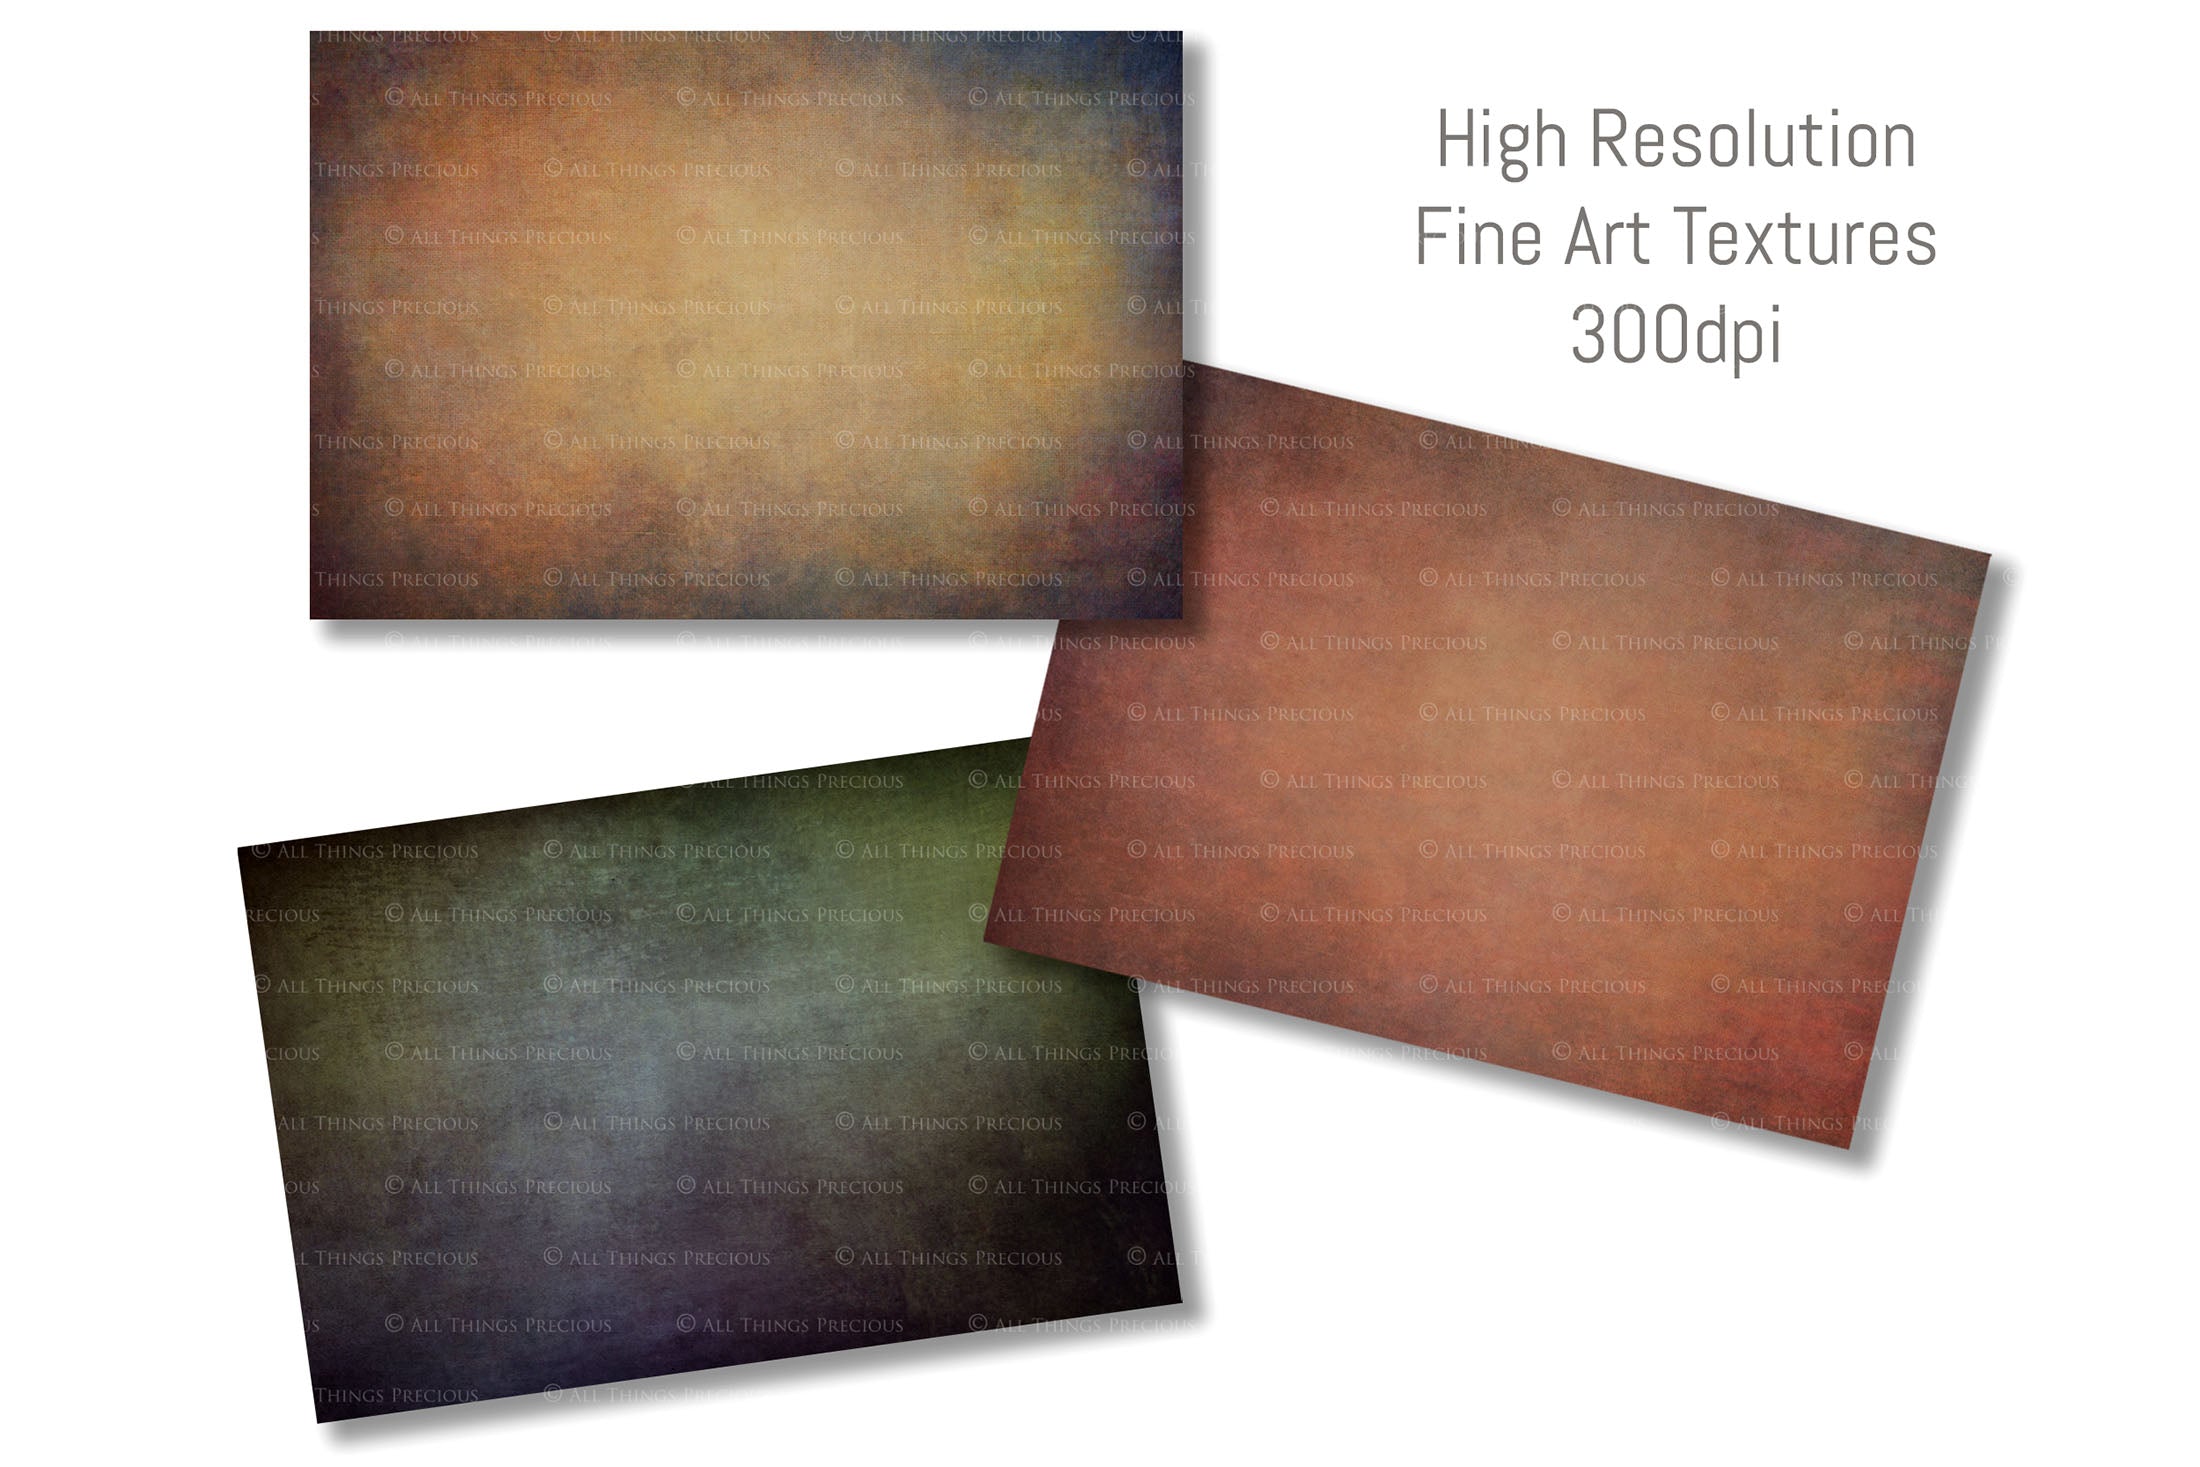 Fine Art Textures. For photography or print as backdrops. High resolution download files. Grunge, Warm, Light, Digital Add Ons. Canvas, Dark, Painterly, Color design. Digital Background Jpeg overlay. Printable Wall Art, Photoshop editing Graphic Assets. by ATP textures.